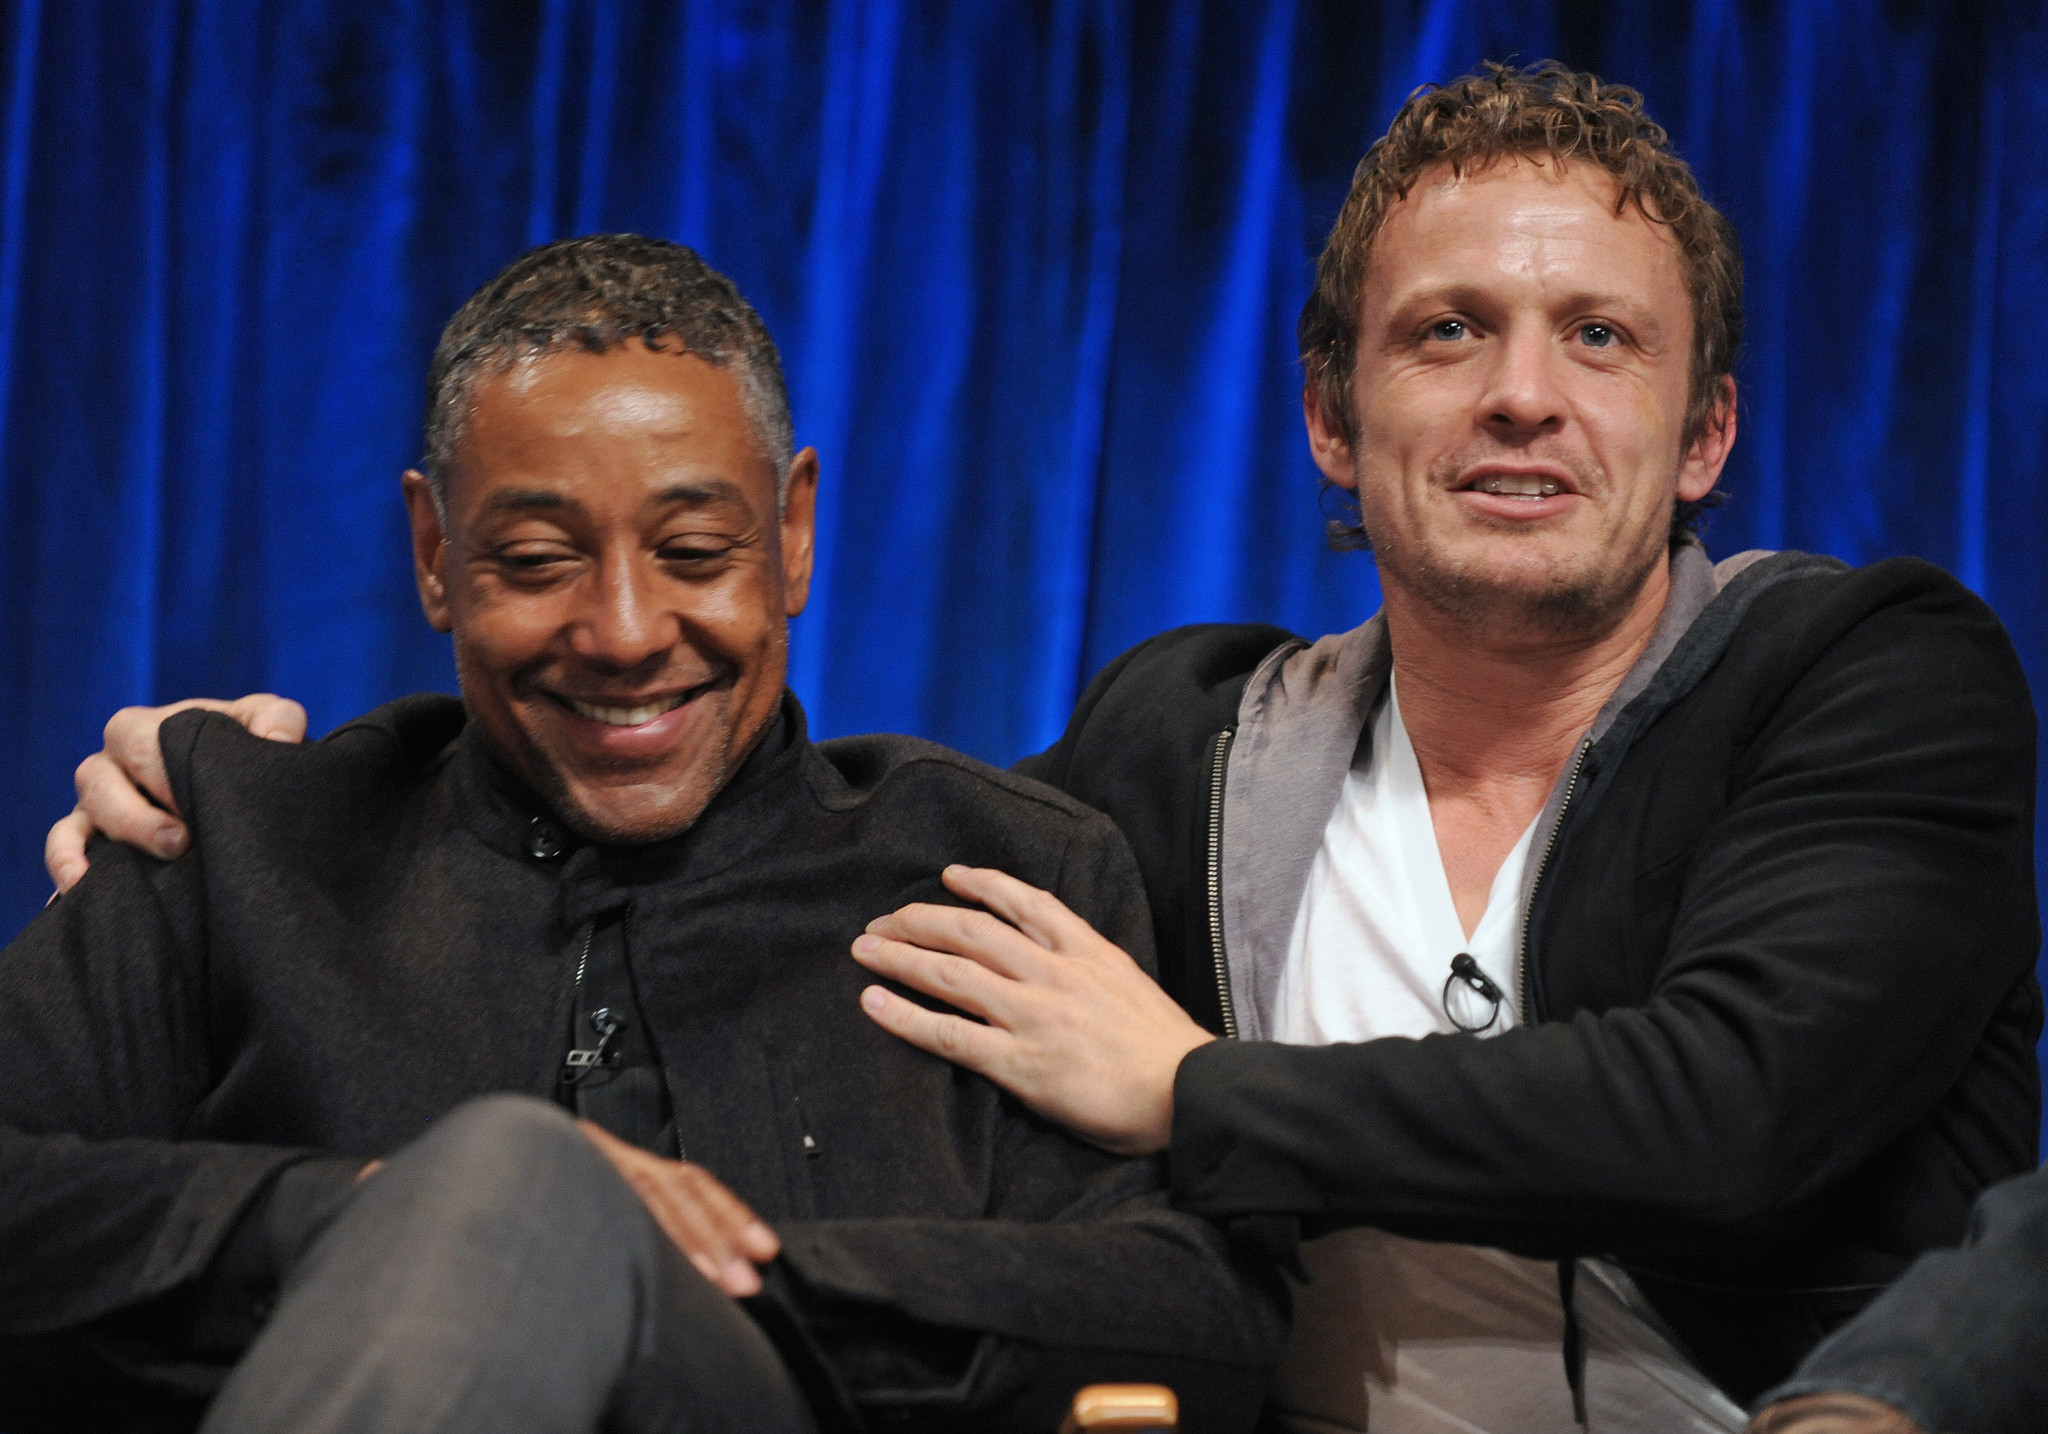 Giancarlo Esposito and David Lyons at event of Revolution (2012)